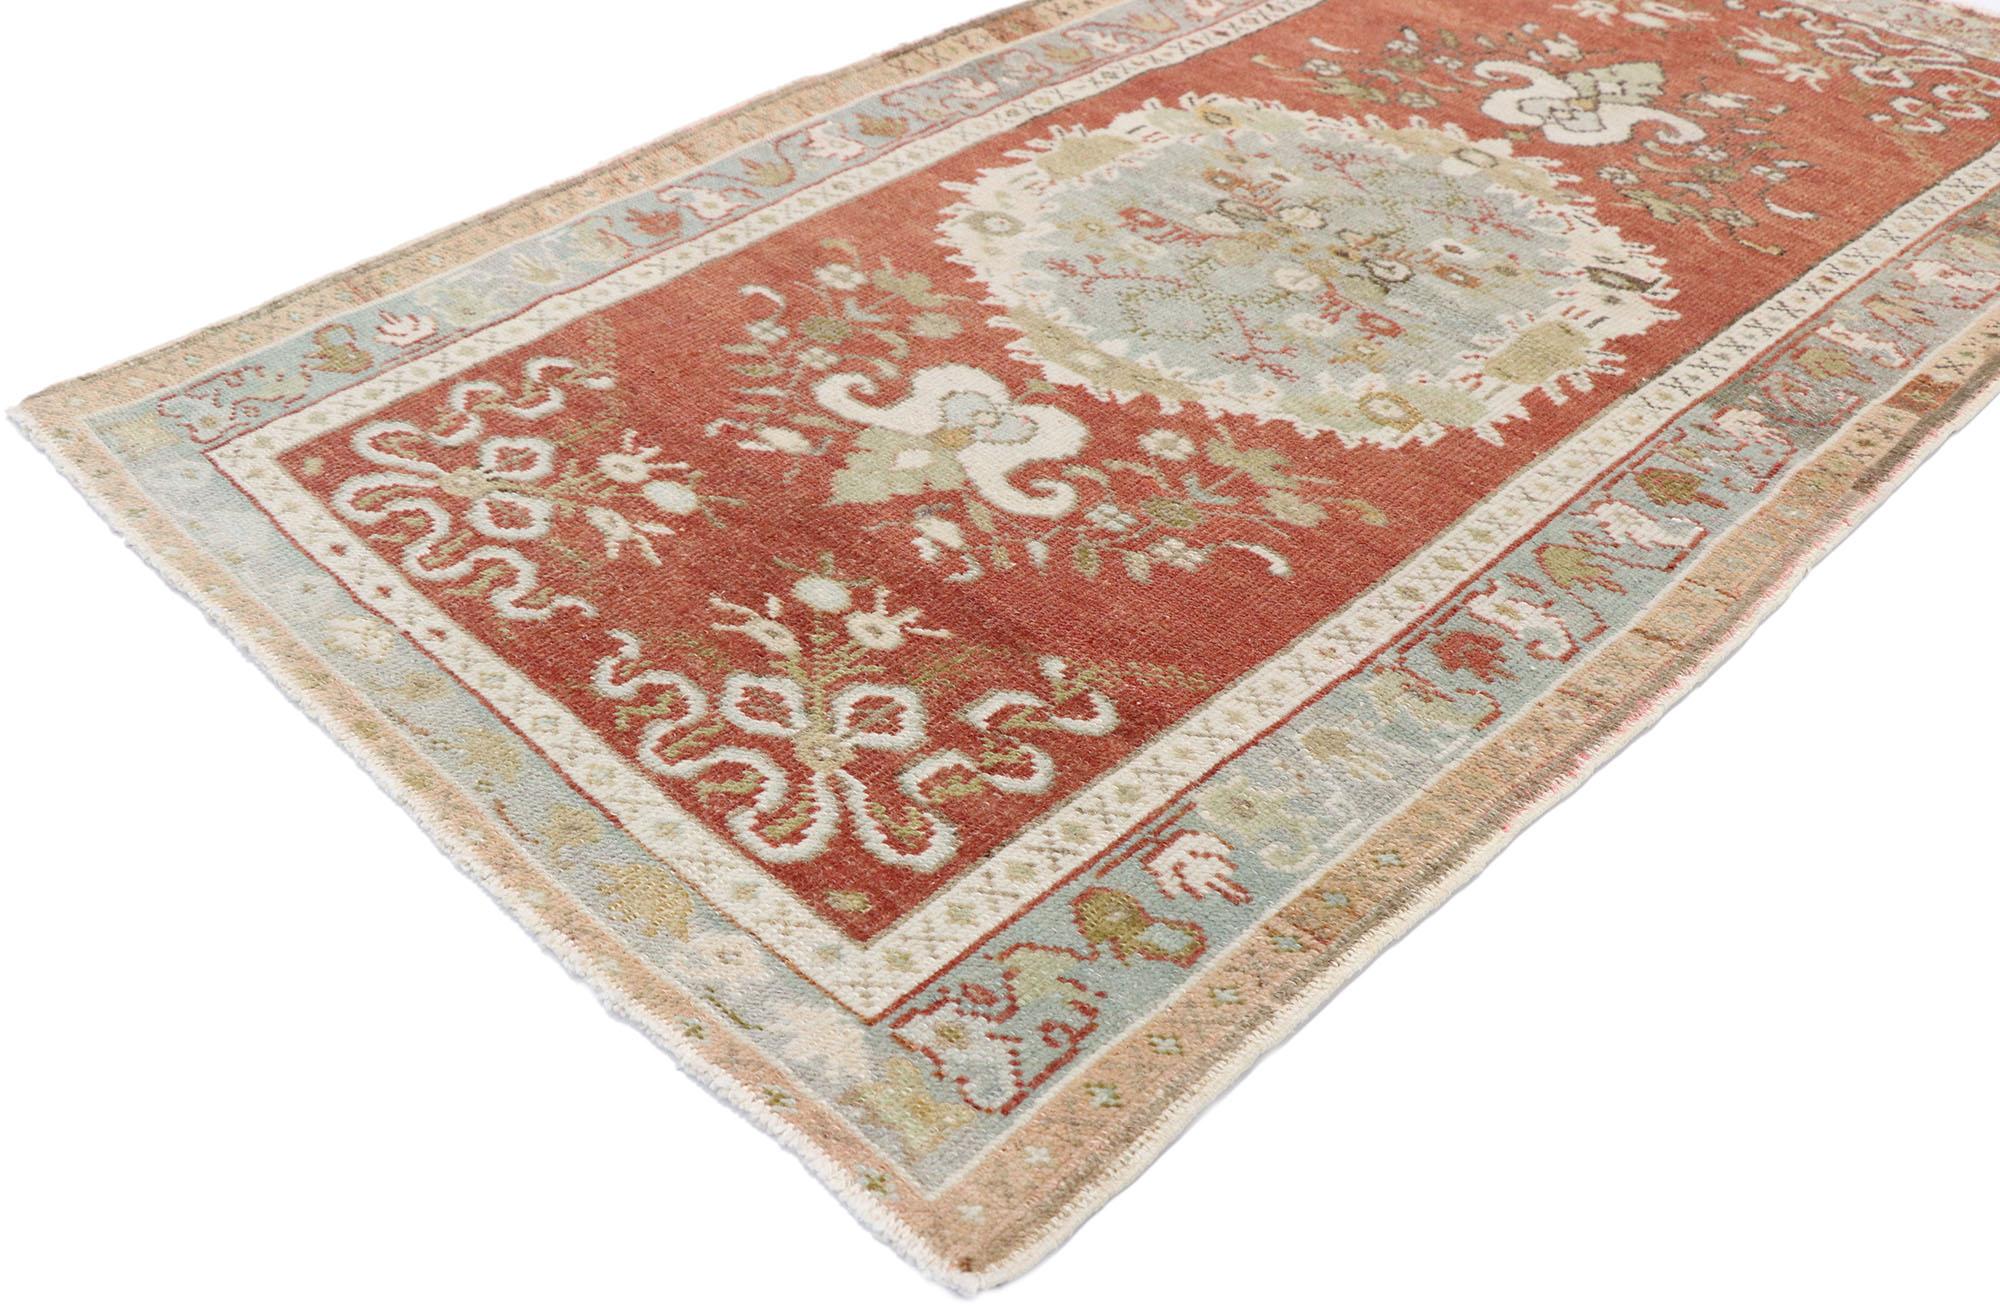 53523, vintage Turkish Oushak rug with rustic French Rococo style. French Rococo Romanticism meets timeless Anatolian tradition in this Classic style in this hand-knotted wool vintage Turkish Oushak rug. Set with an elaborate center round medallion